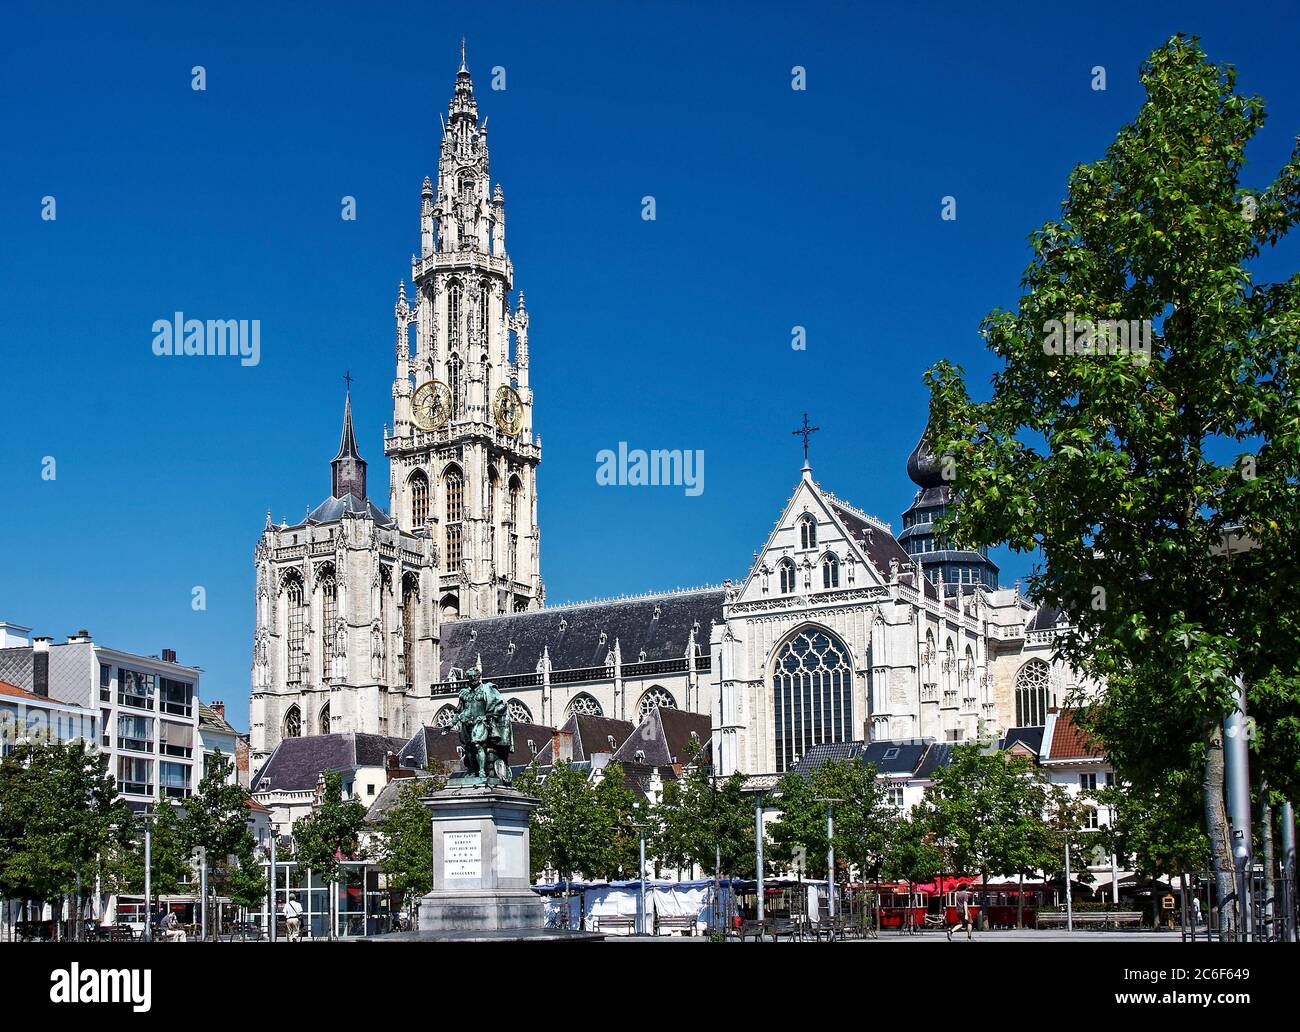 Our Lady Cathedral; 13-15 century; ornate architecture, 415 foot spire; two clocks, Catholic church, religious building, Groenplaats; Peter Paul Ruben Stock Photo